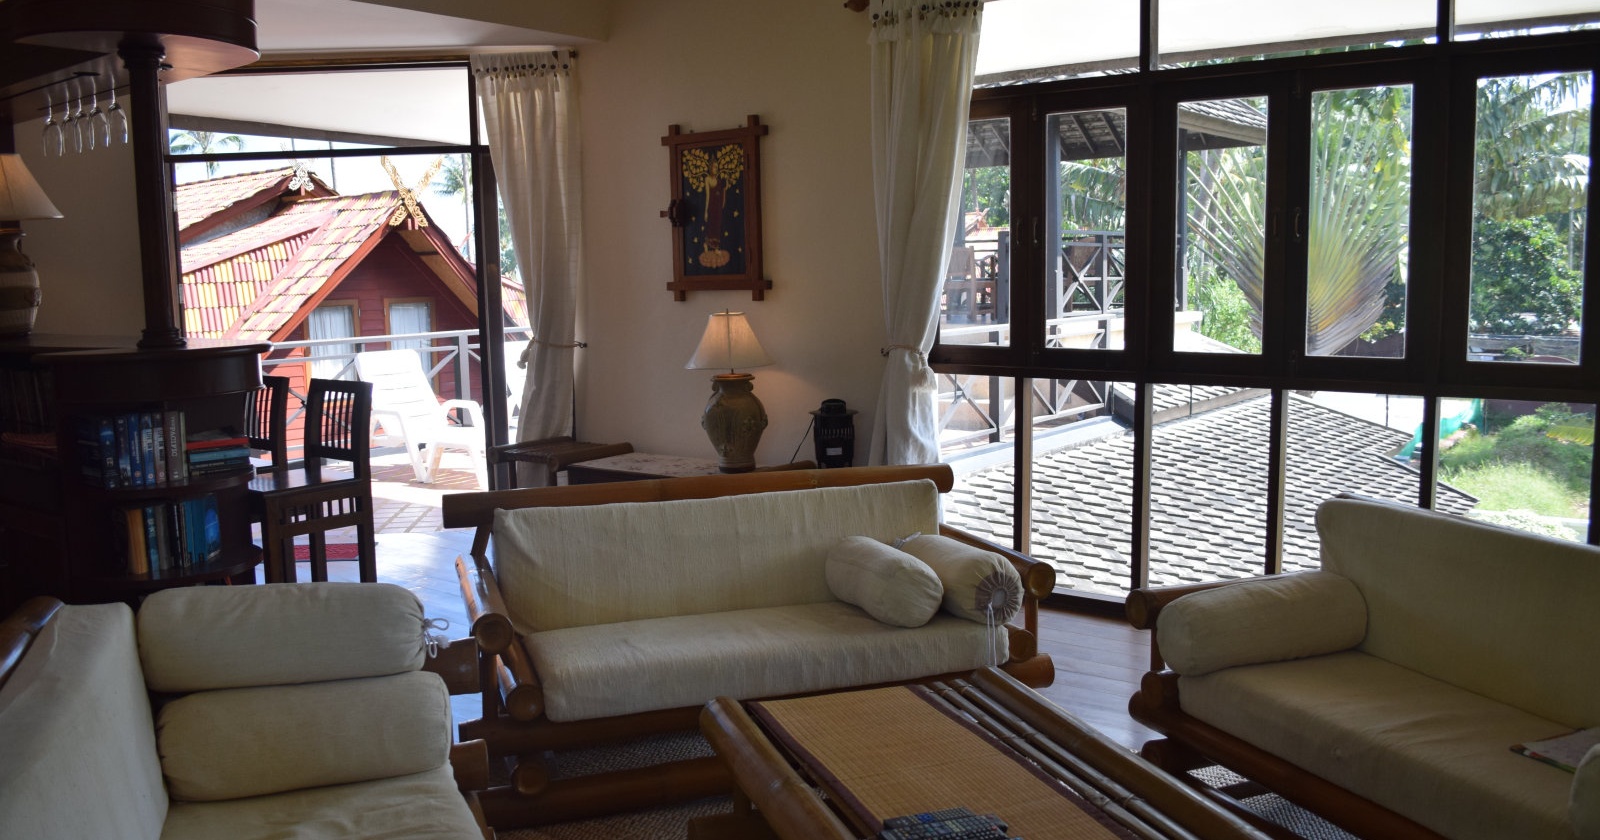 P9 Coconut Paradise Balinese Style 4 Bedroom Villa with Private Pool within Walled Garden